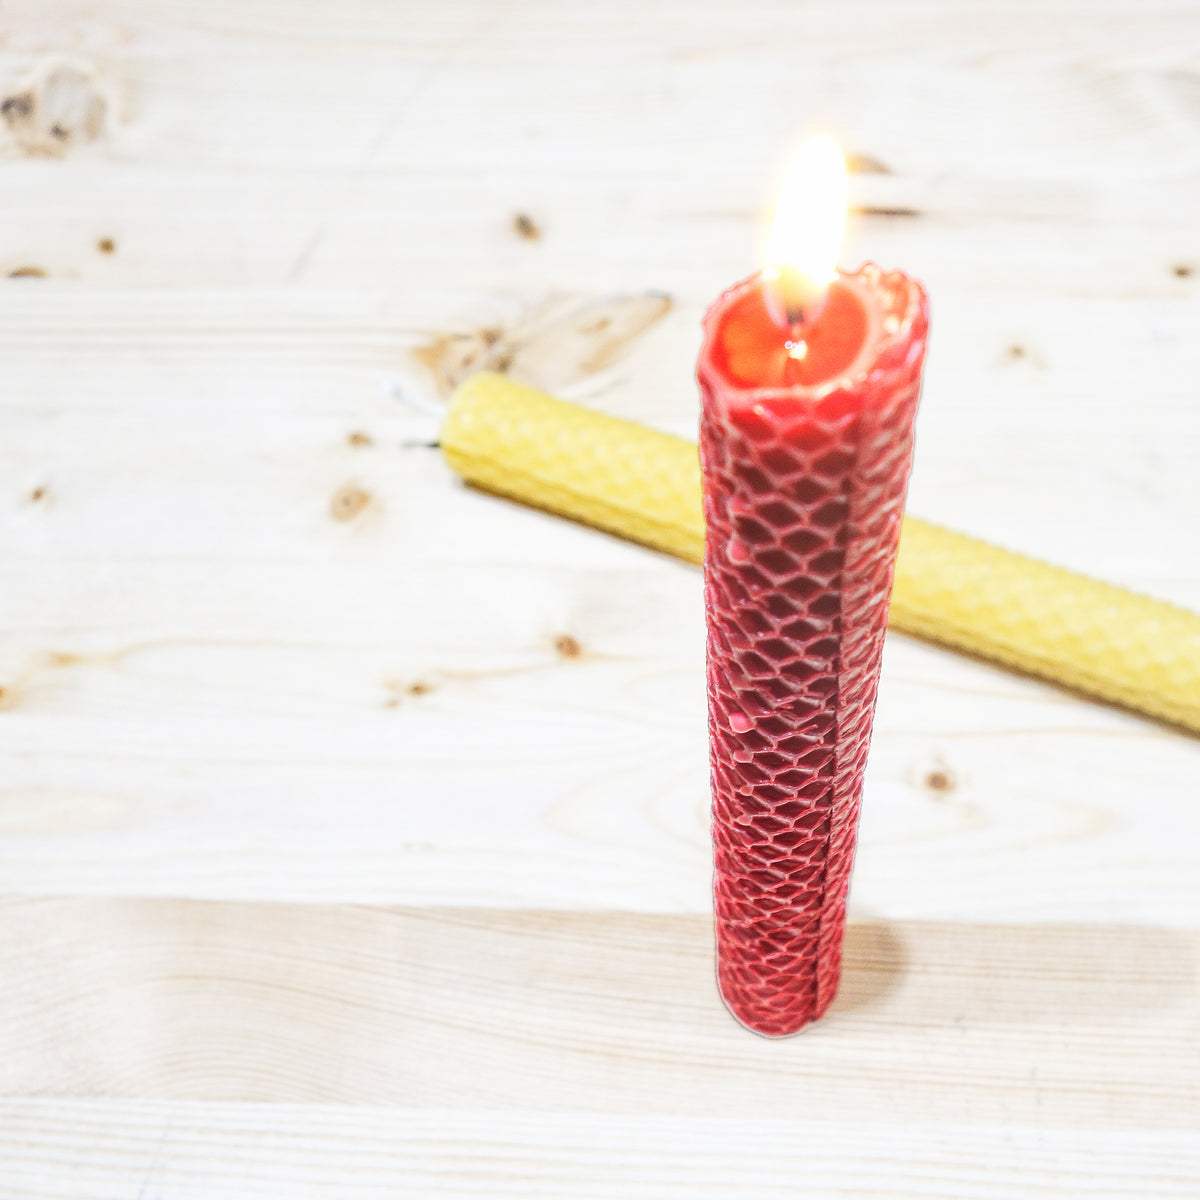 Large Mixed Set of Beeswax Candles